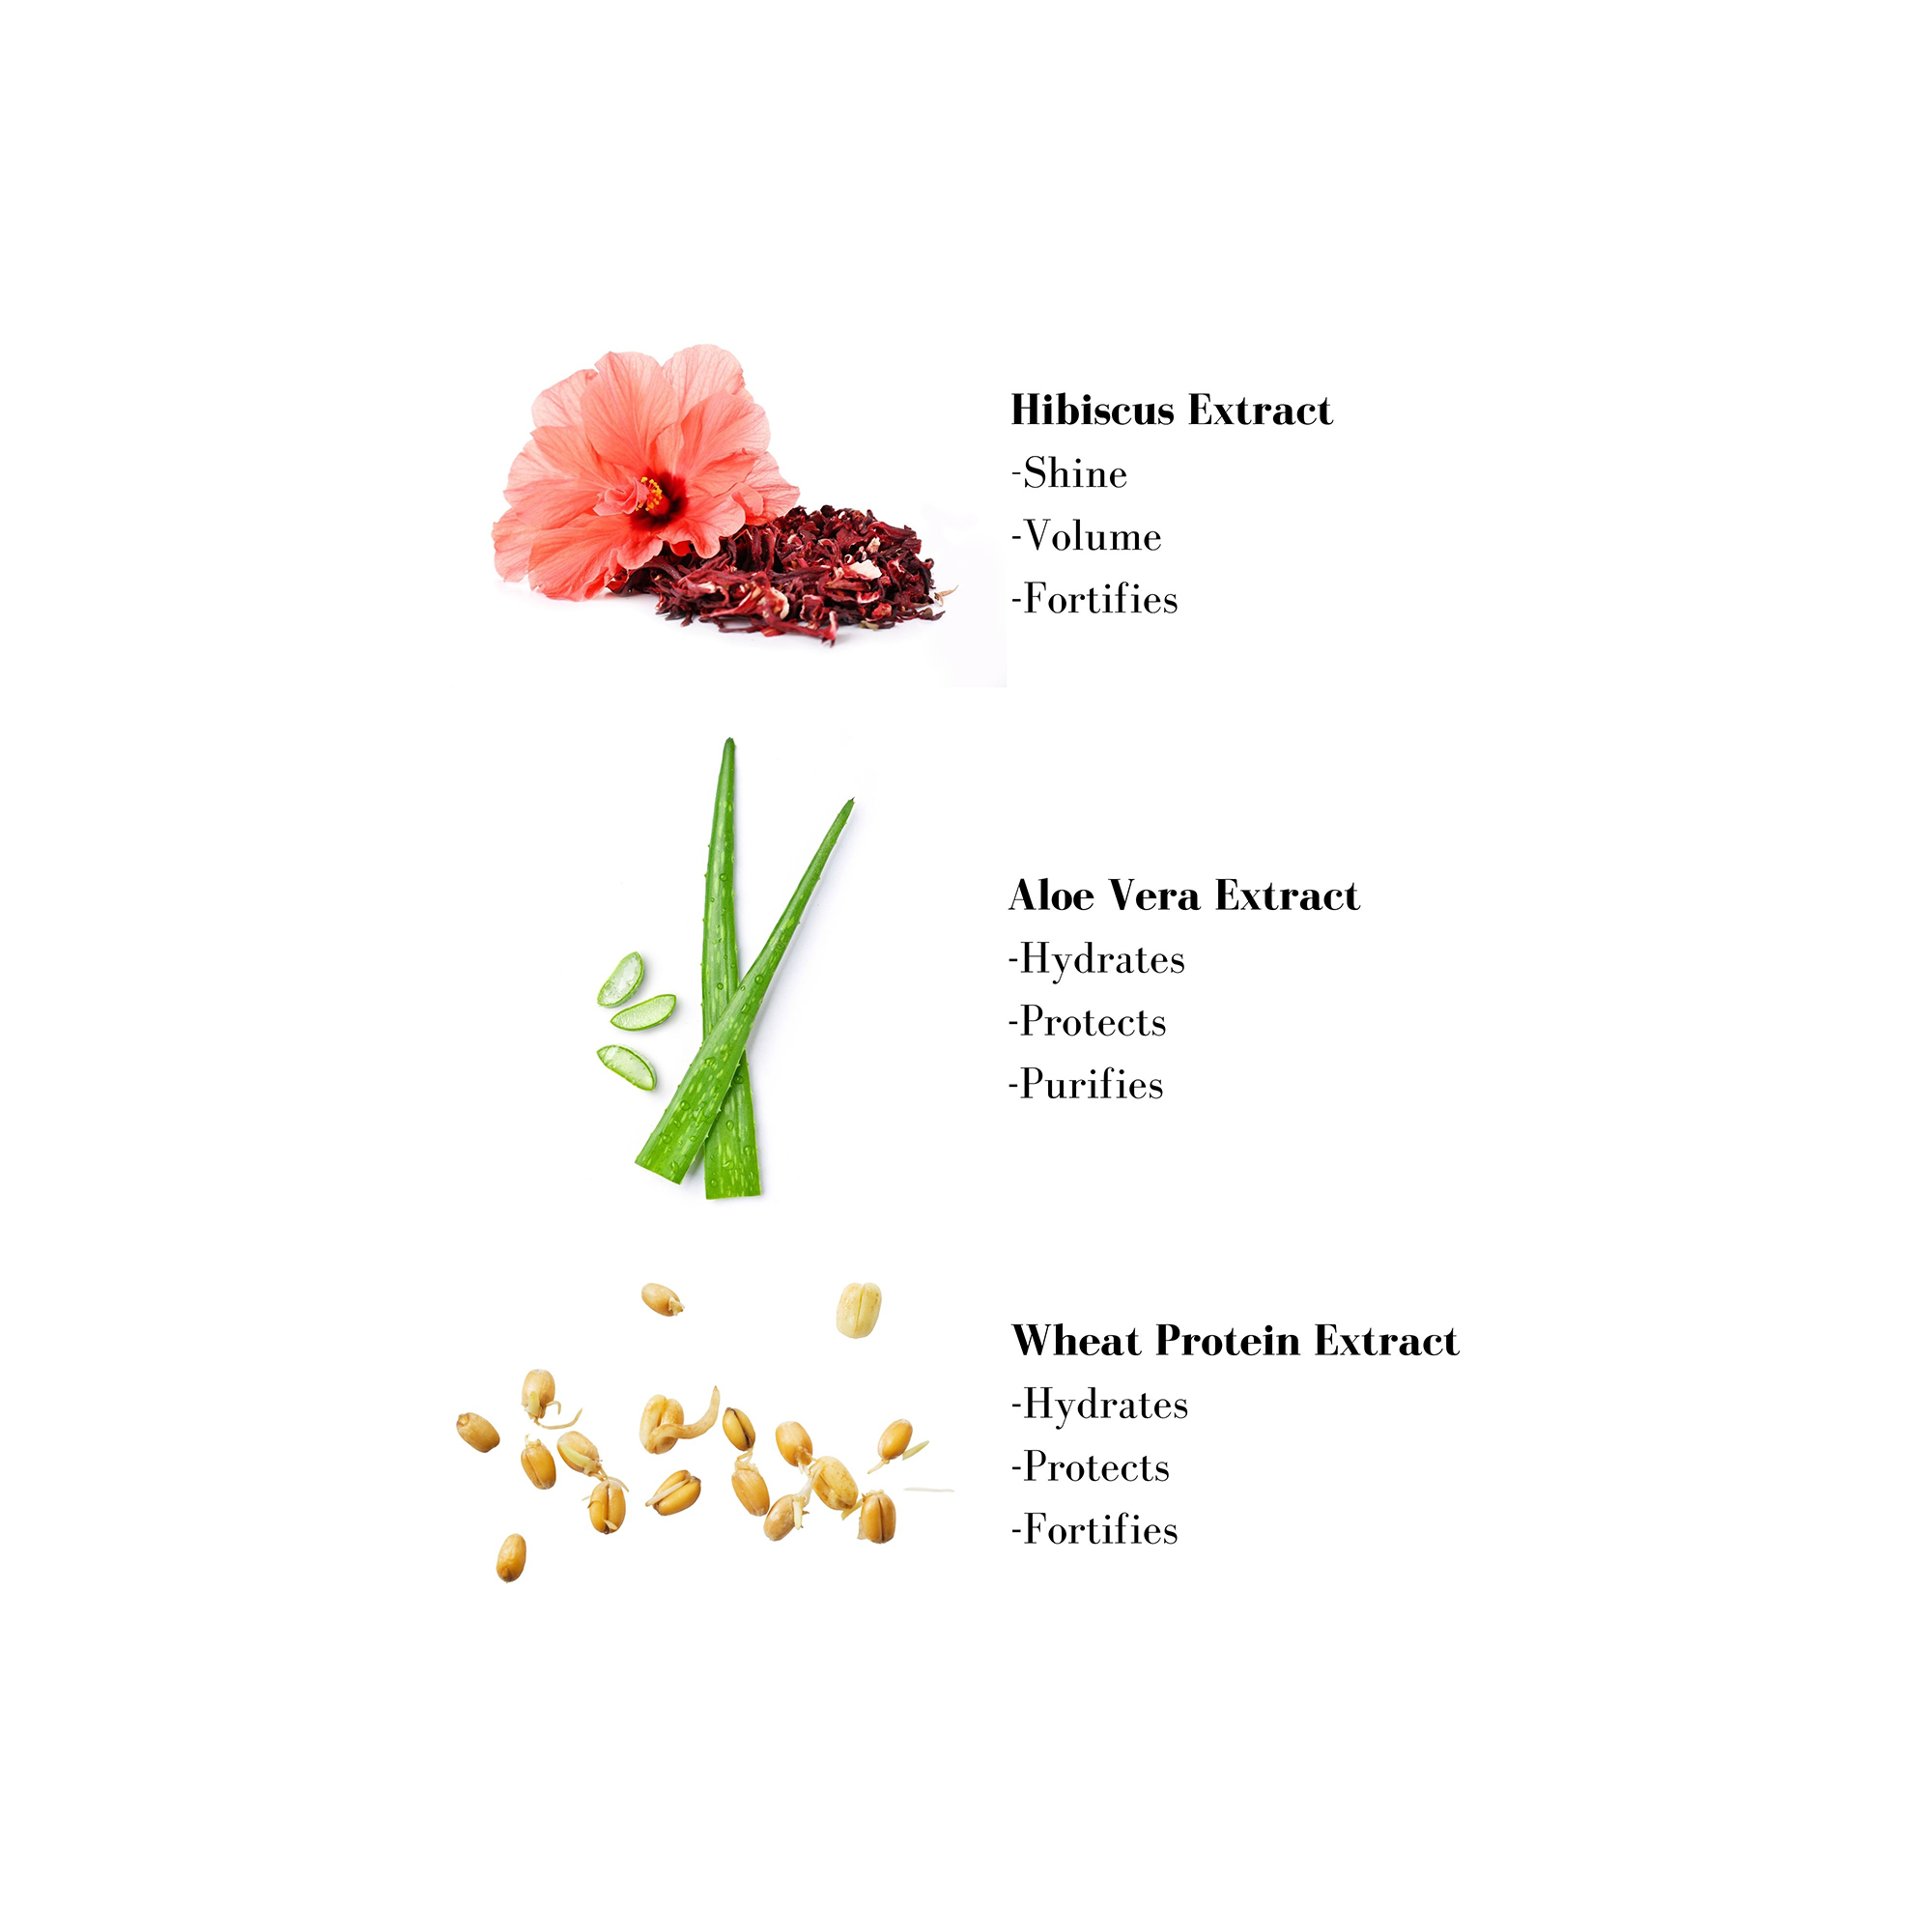 Image 1- Hibiscus Extract -Shine - Volume -Fortifies Aloe Vera Extract -Hydrates -Protects -Purifies Wheat Protein Extract -Hydrates -Protects -Fortifies